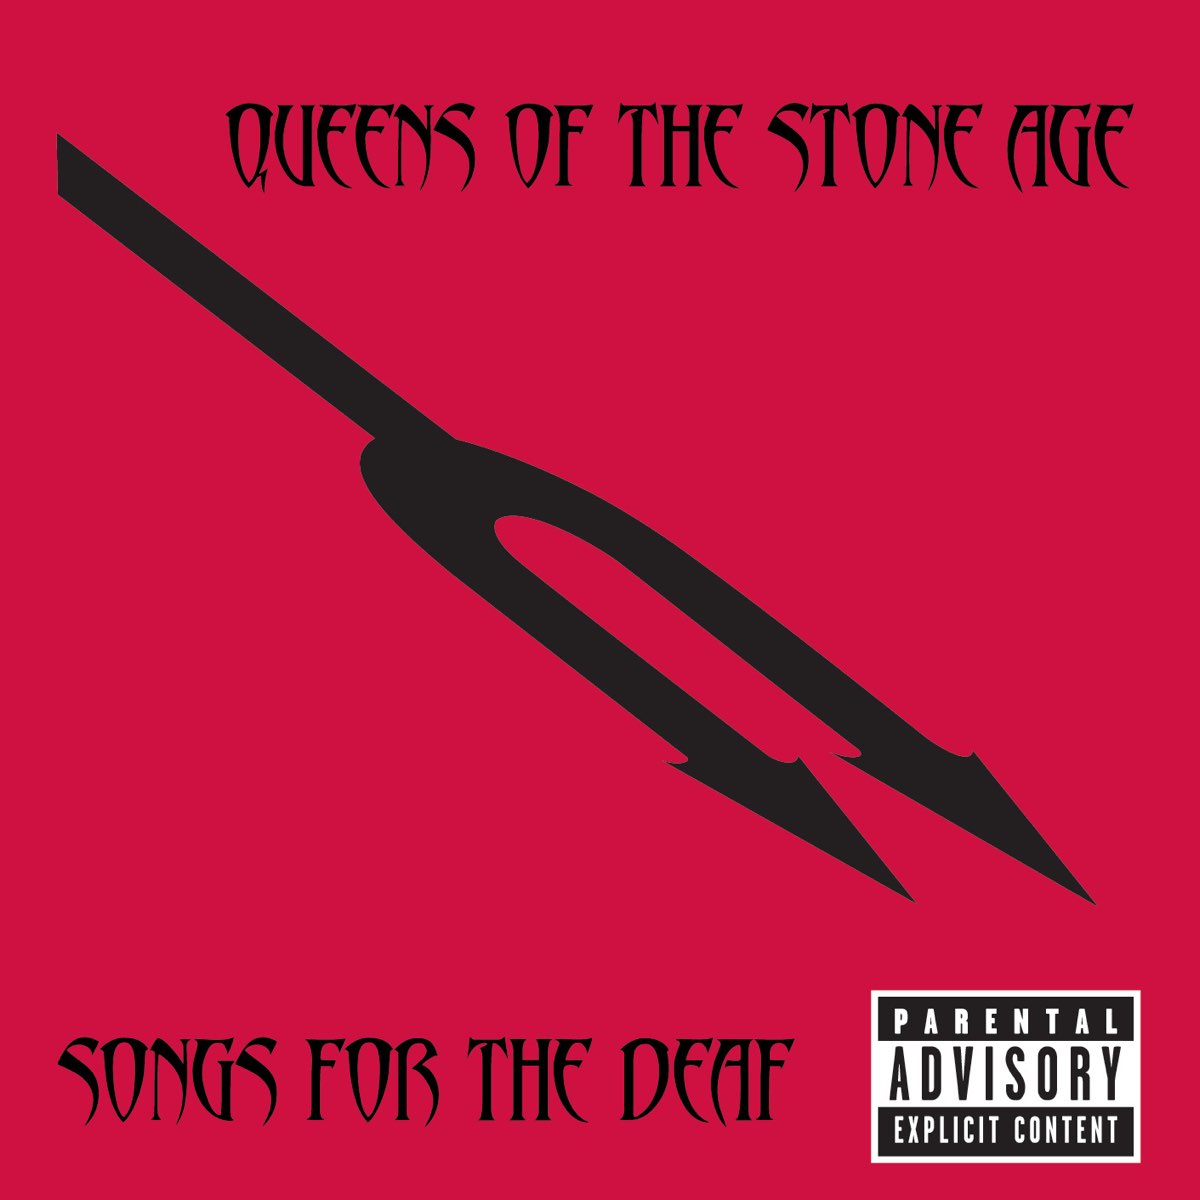 Songs for the Deaf - Album by Queens of the Stone Age - Apple Music